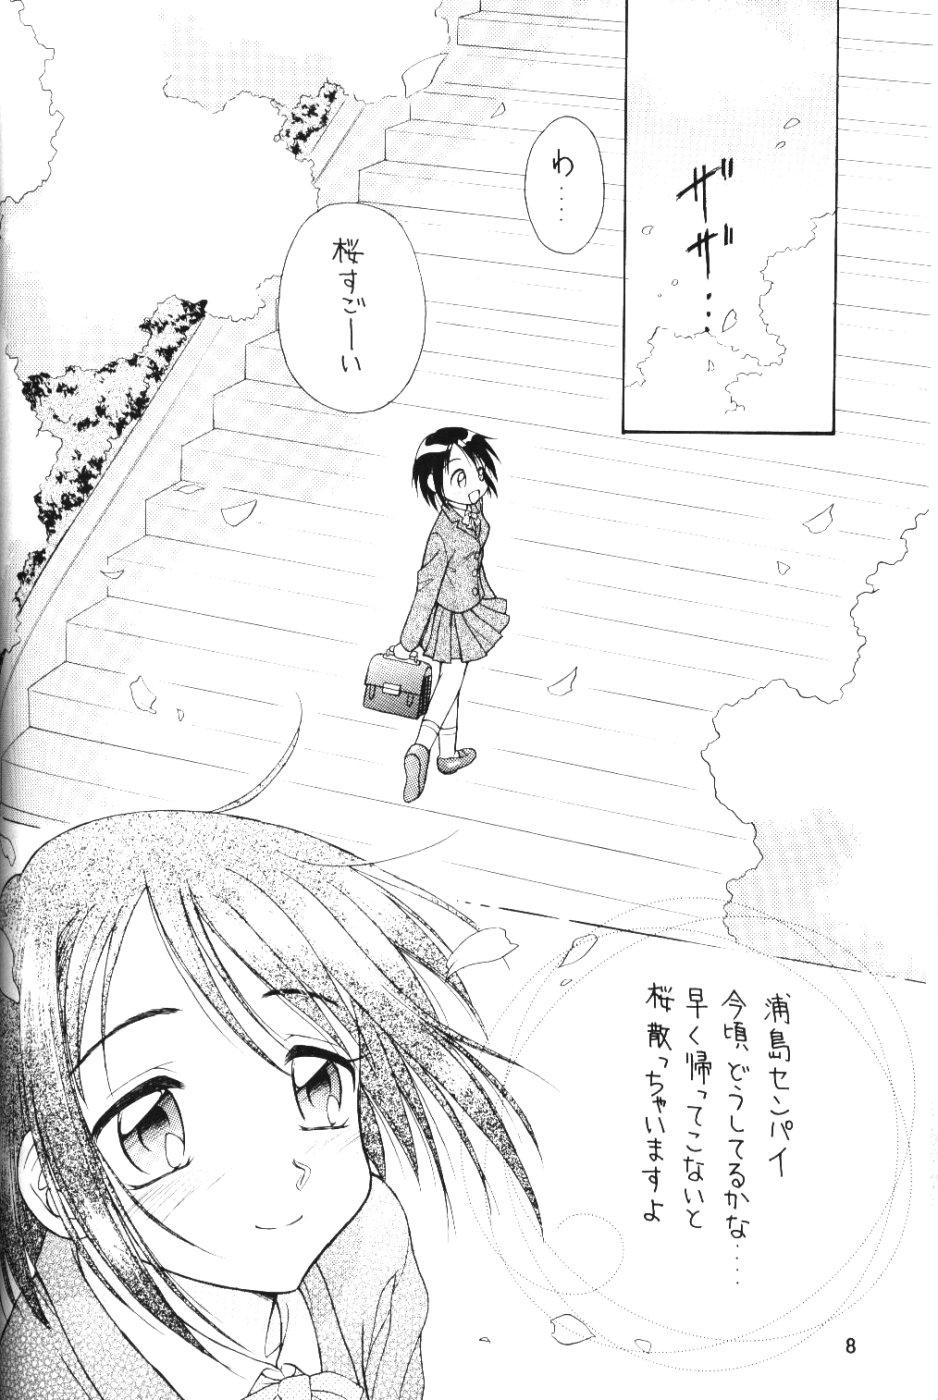 Piroca Lovely 4 - Love hina Gay Amateur - Page 7